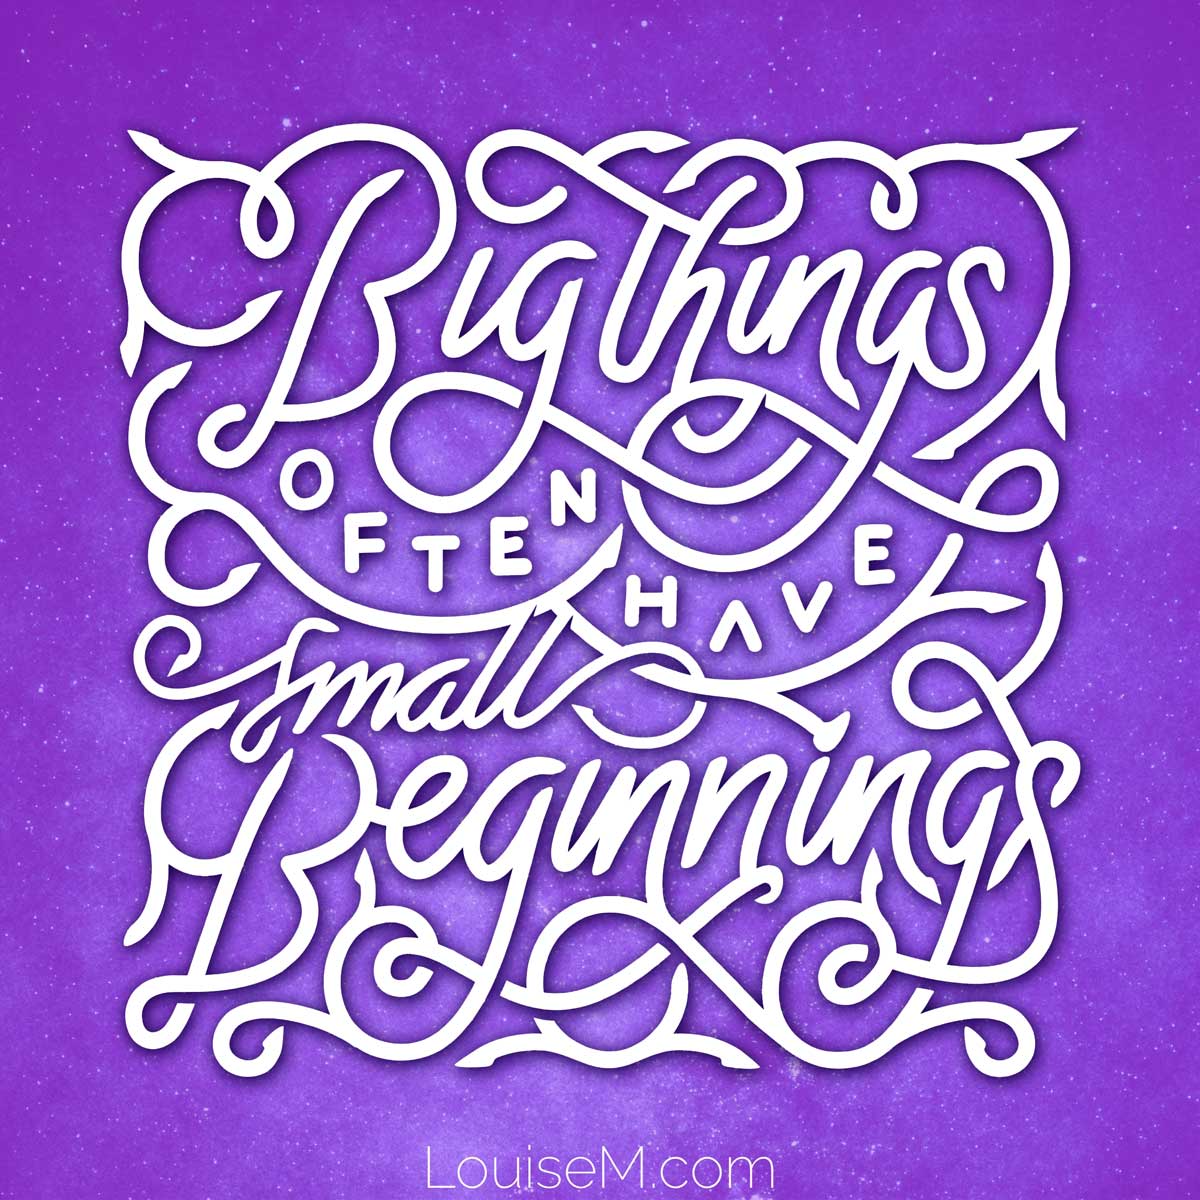 purple quote graphic says big things have small beginnings in fancy script.